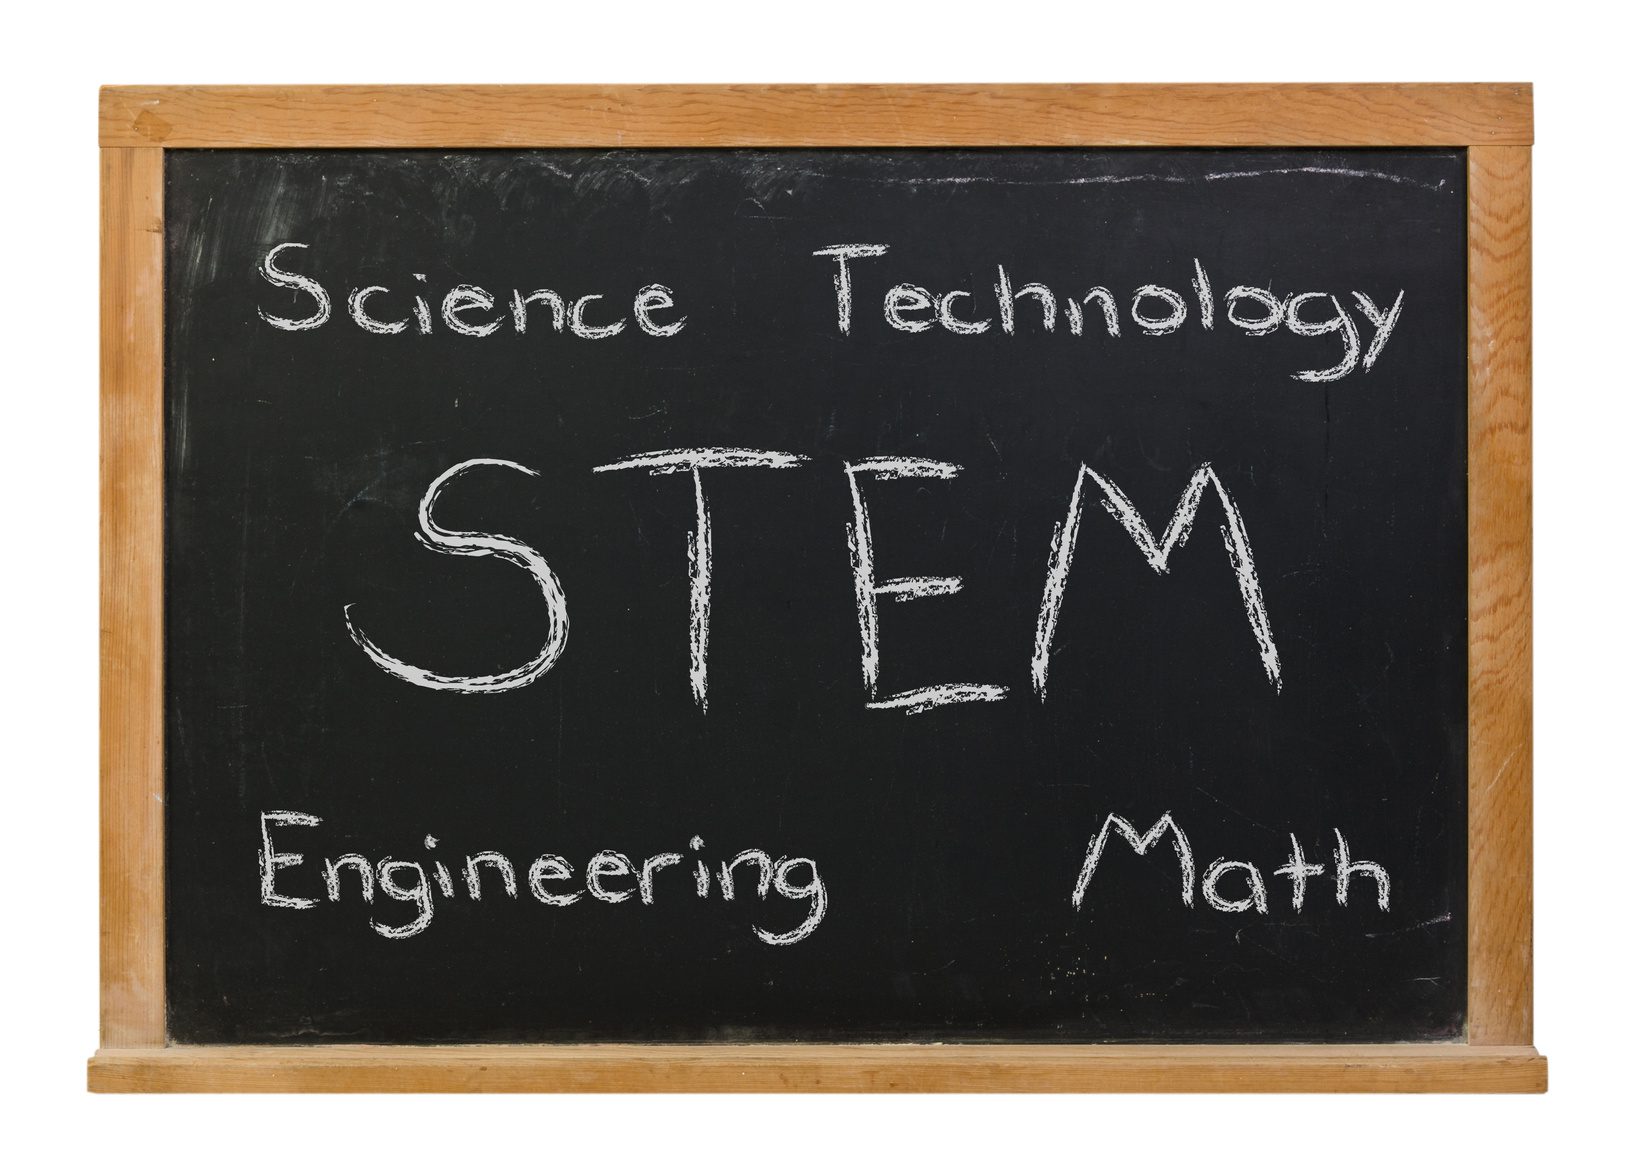 DHS Proposes Updated Regulations to Improve the Ability of Students in the STEM Fields to Work in the U.S.